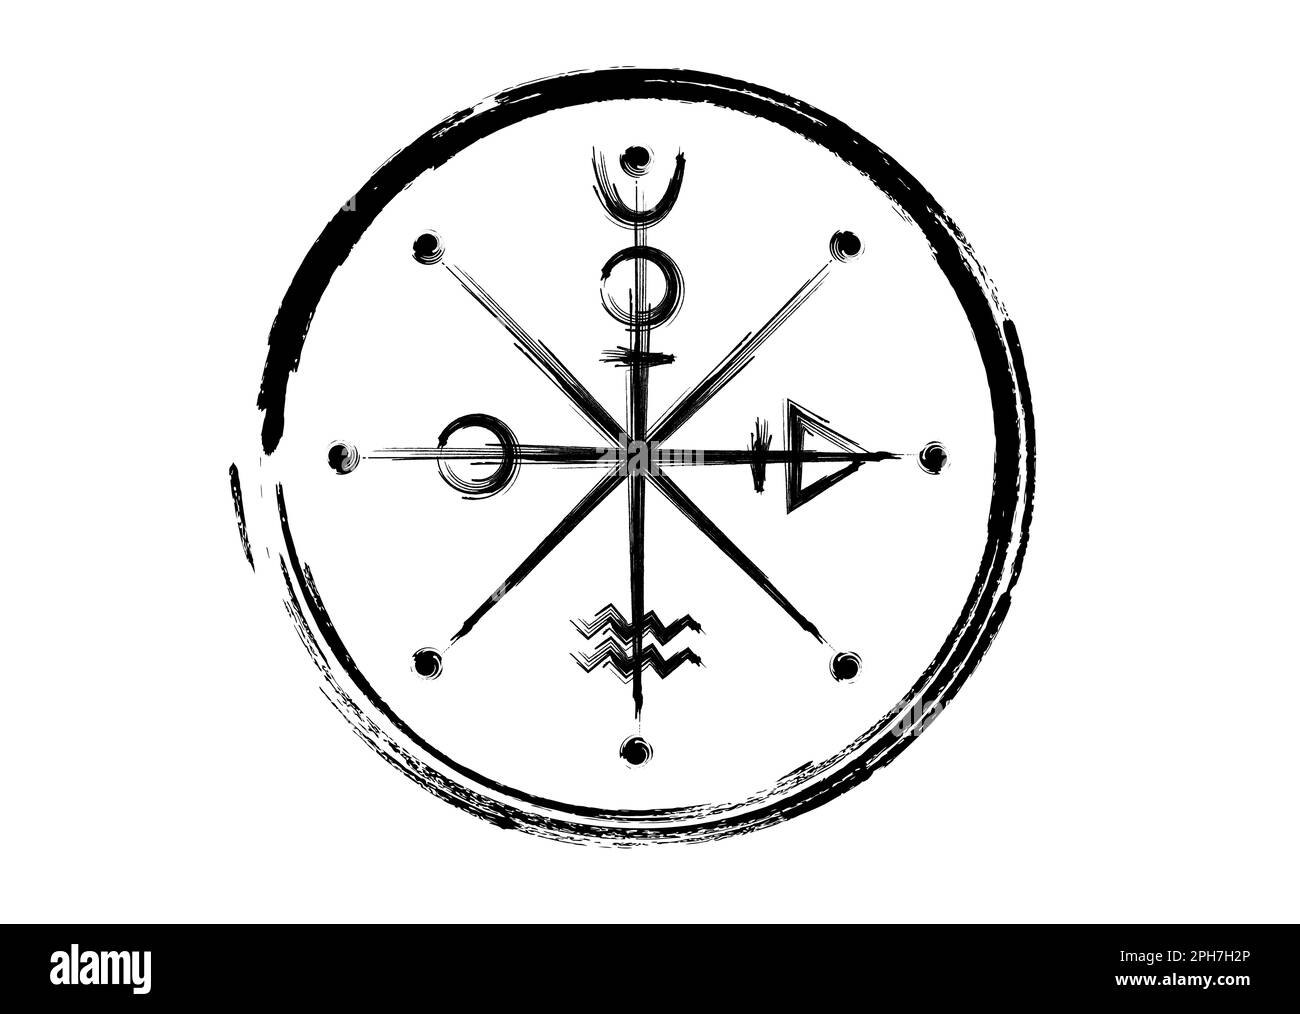 The Wheel of Fotune tarot symbol, worldwide ancient sign, the cycle of life, hand drawing brush stroke style magical witch black tattoo icon of sacred Stock Vector